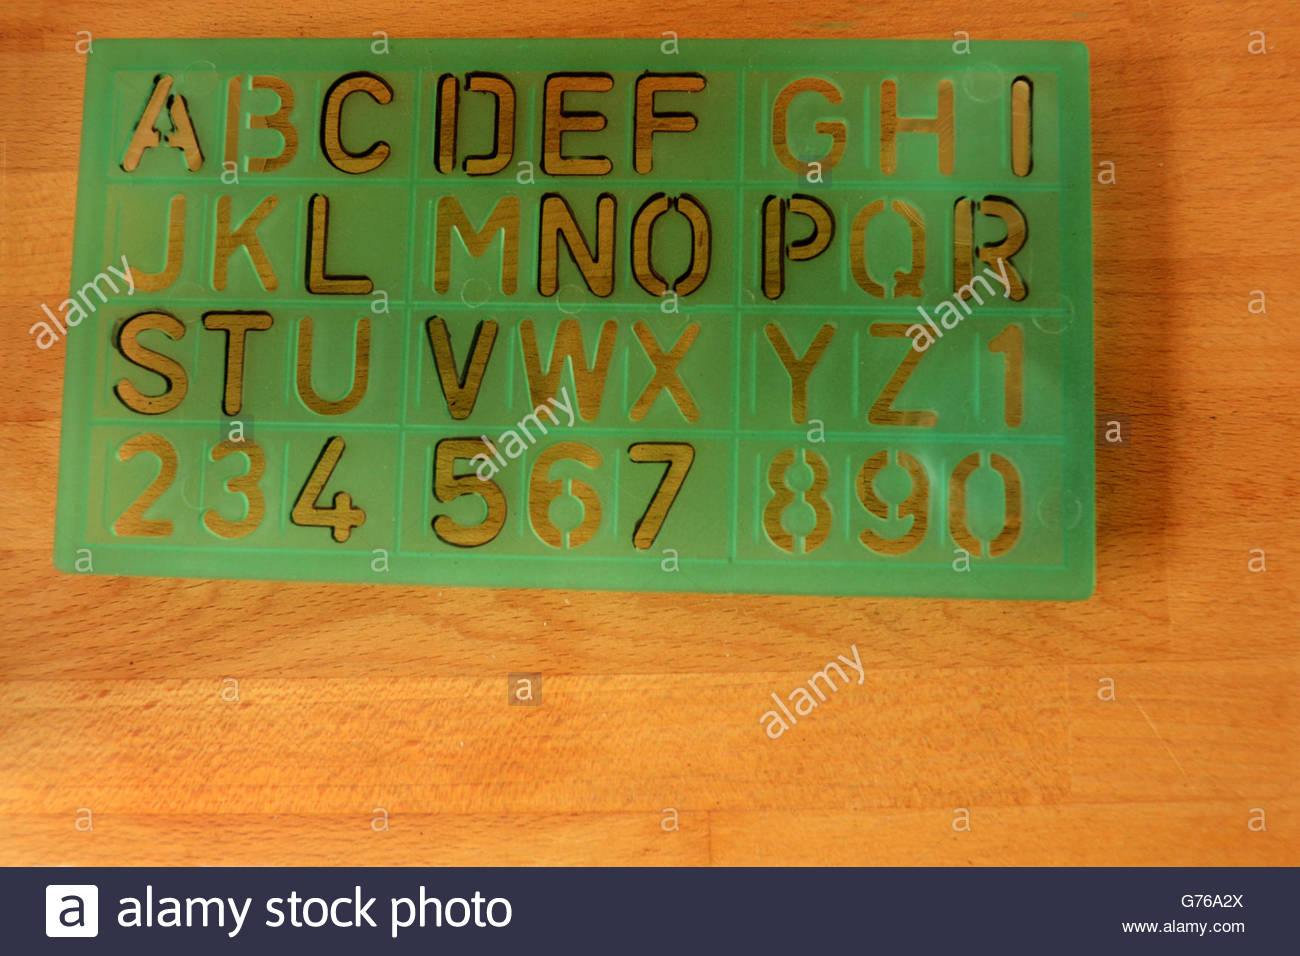 Stencil Letters Stock Photos &amp; Stencil Letters Stock Images intended for Tracing Stencils Letters